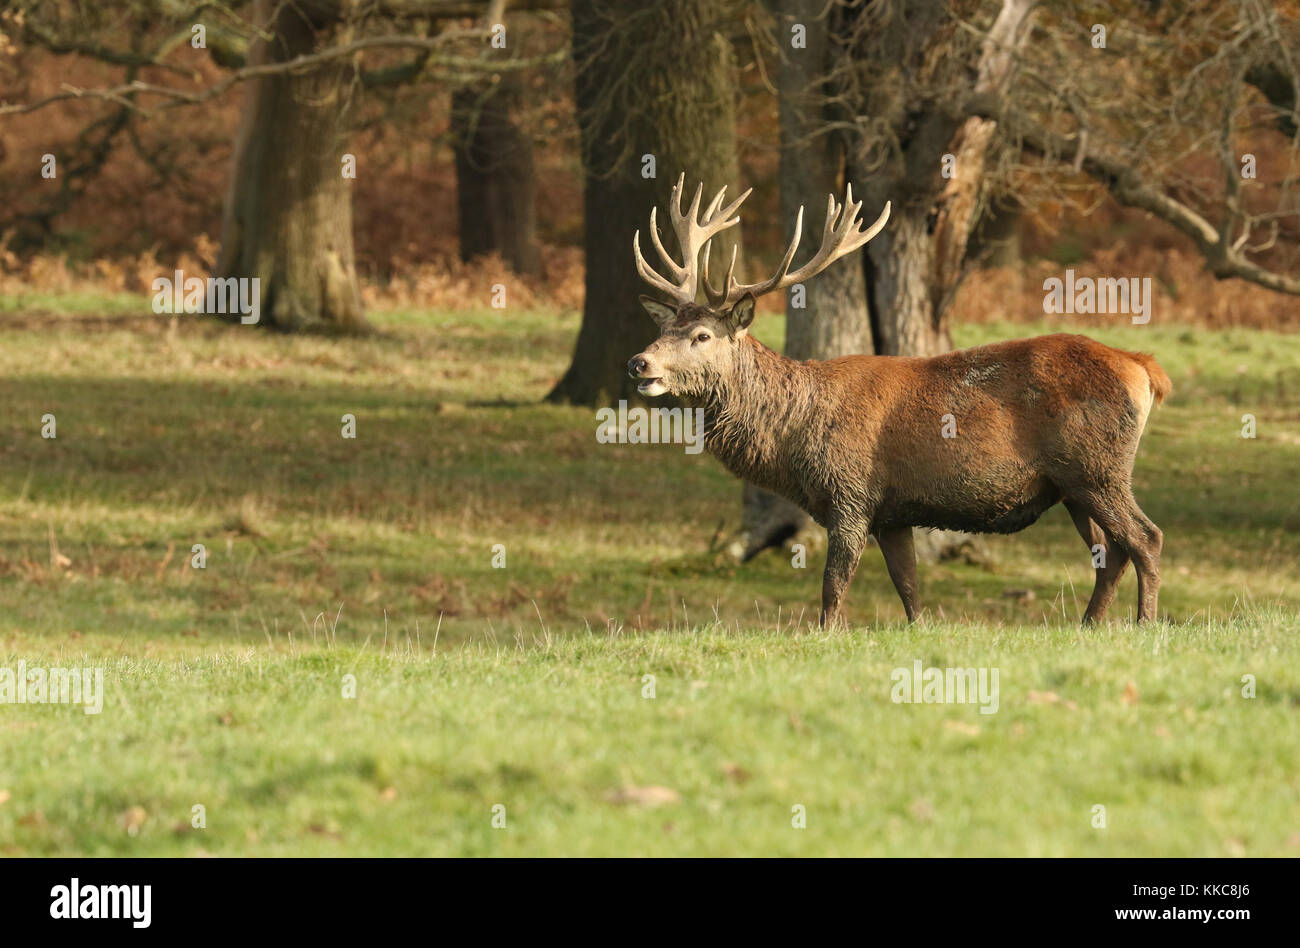 A Red Deer Stag (Cervus elaphus) at the edge of a field during rutting season. Stock Photo